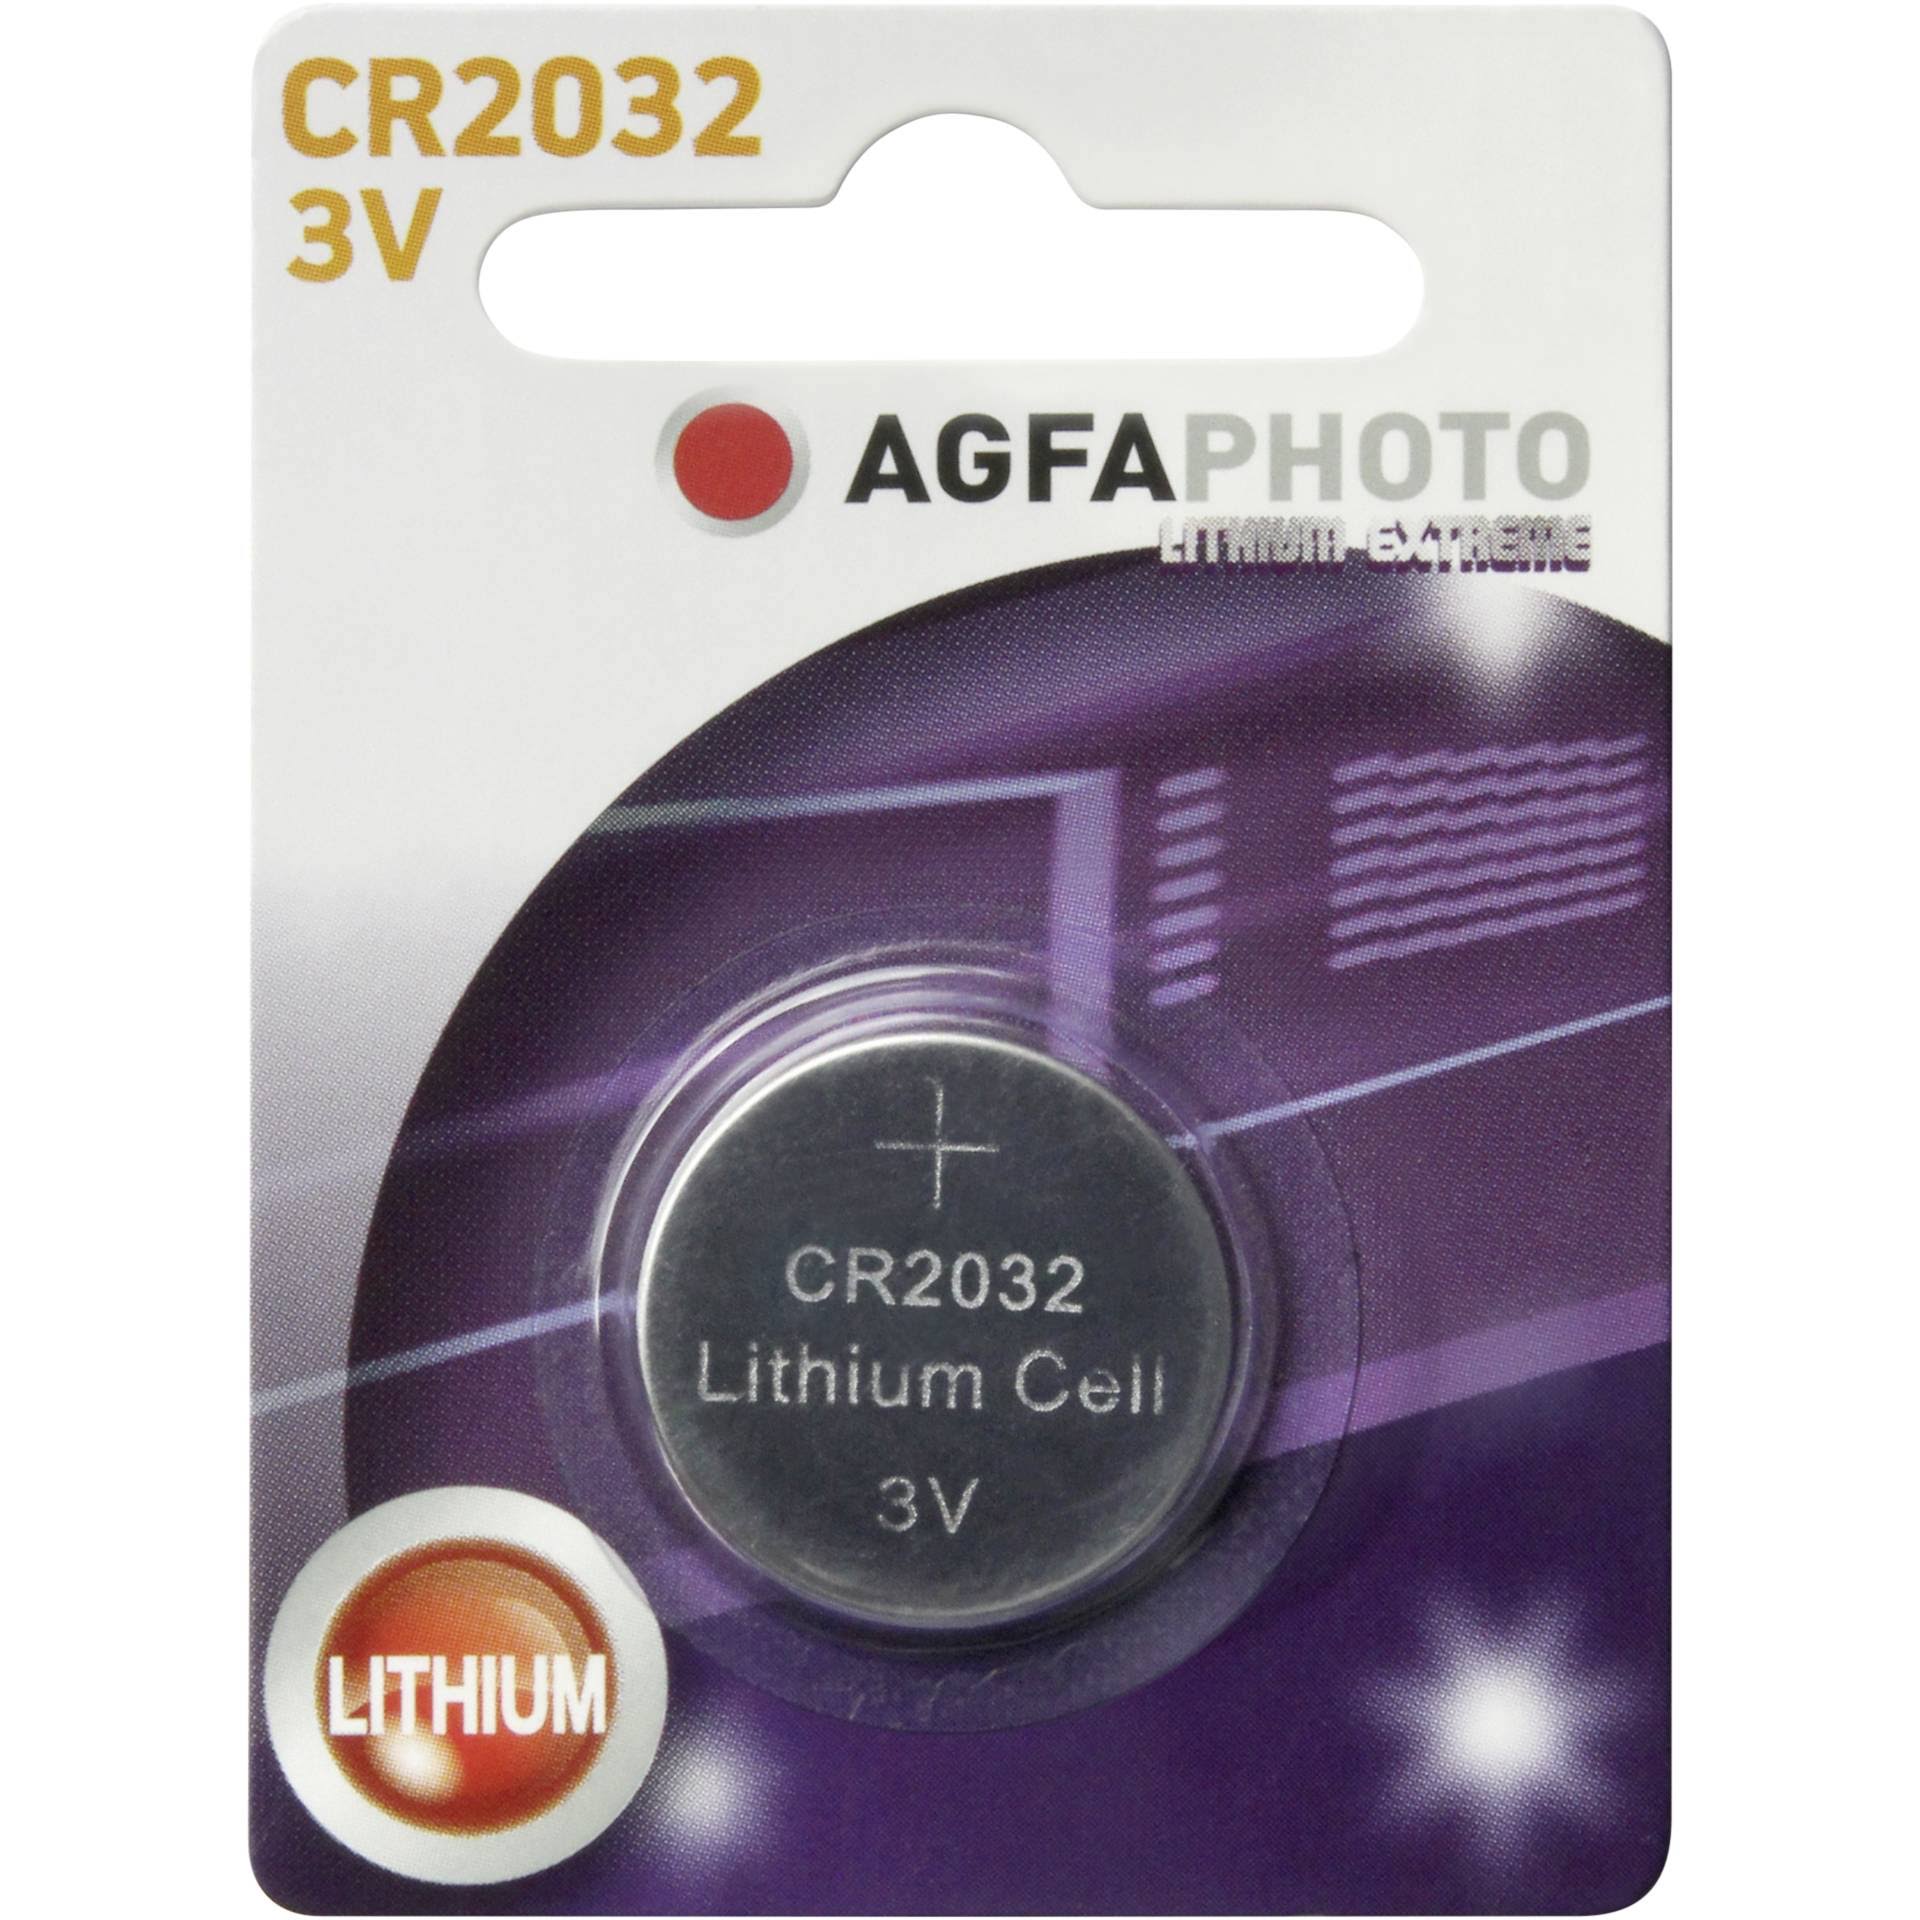 AgfaPhoto CR2032 Round Cell - Lithium, 3V